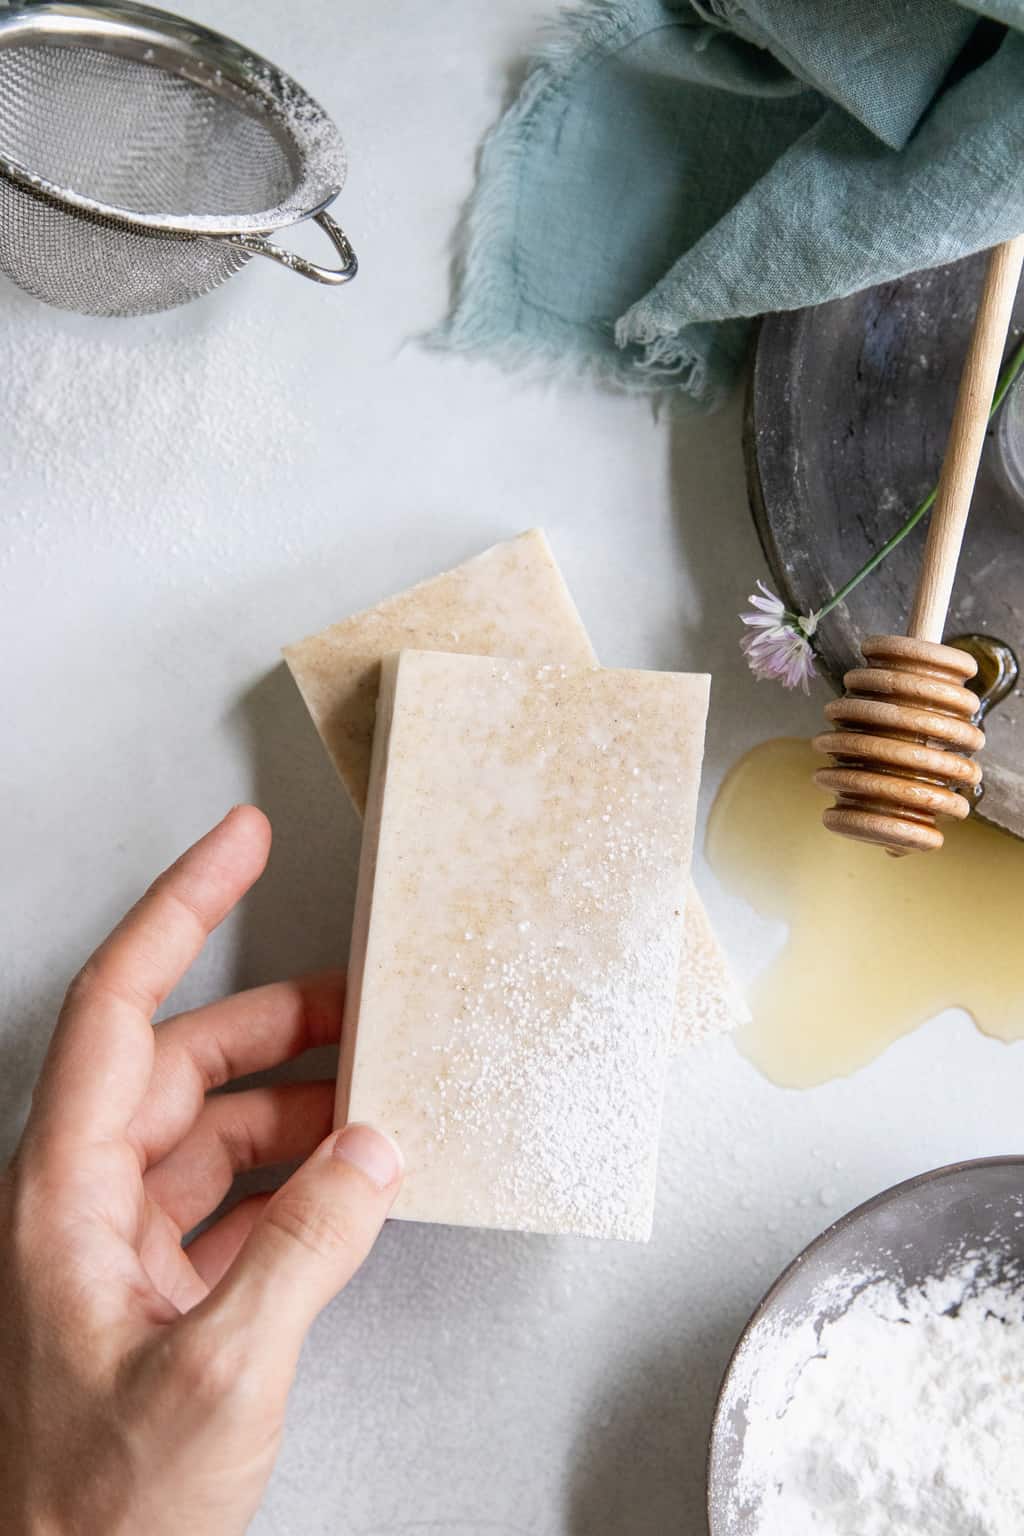 With a hydrating combination of ingredients to heal dry, irritated and sensitive skin, this DIY goat milk soap is just what you need this winter.